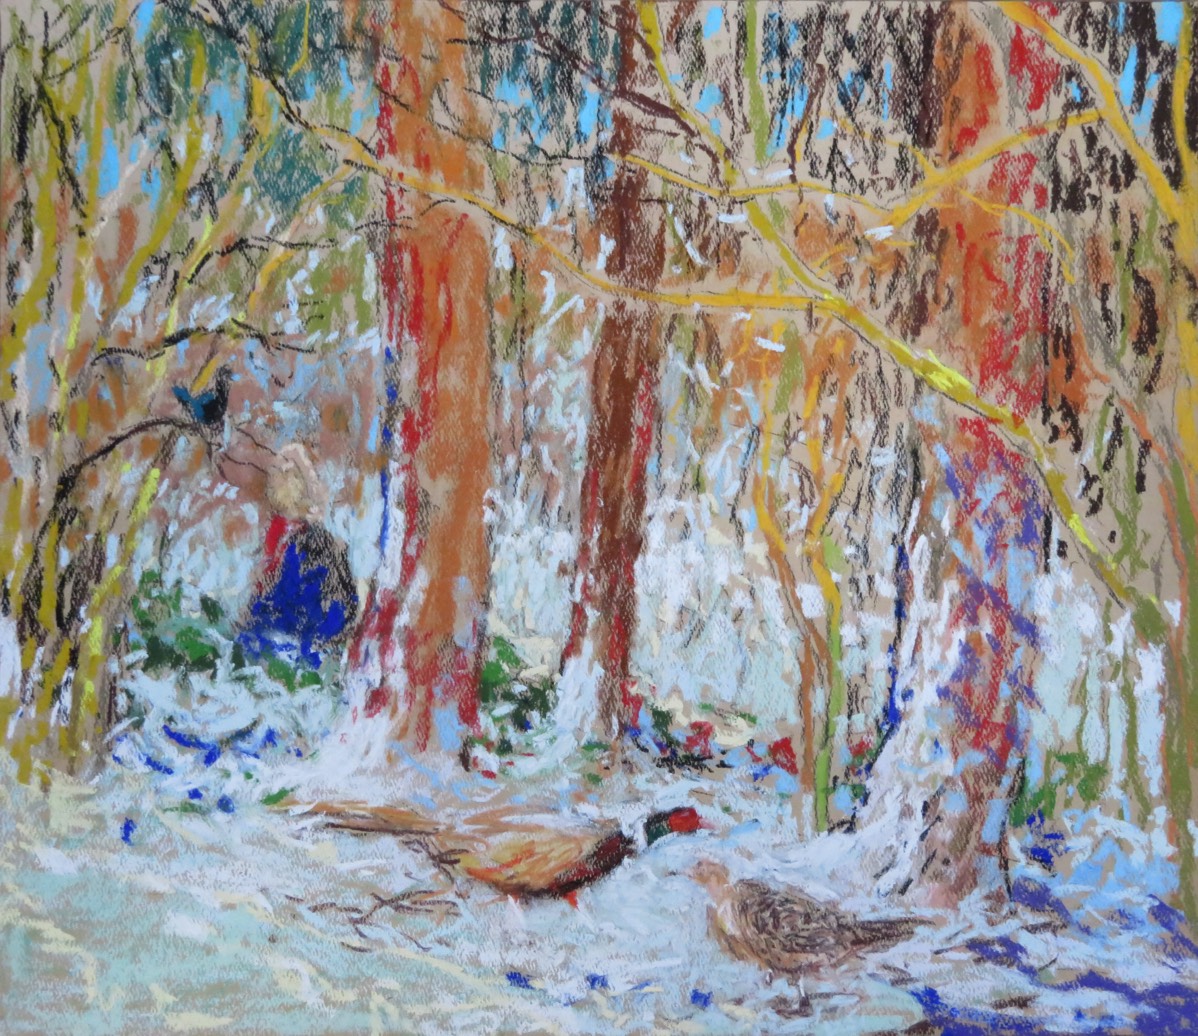 Molly (Blackbird), Laura and Pheasants - Pastel 17.25 X 20 inches - Created 2nd January 2021